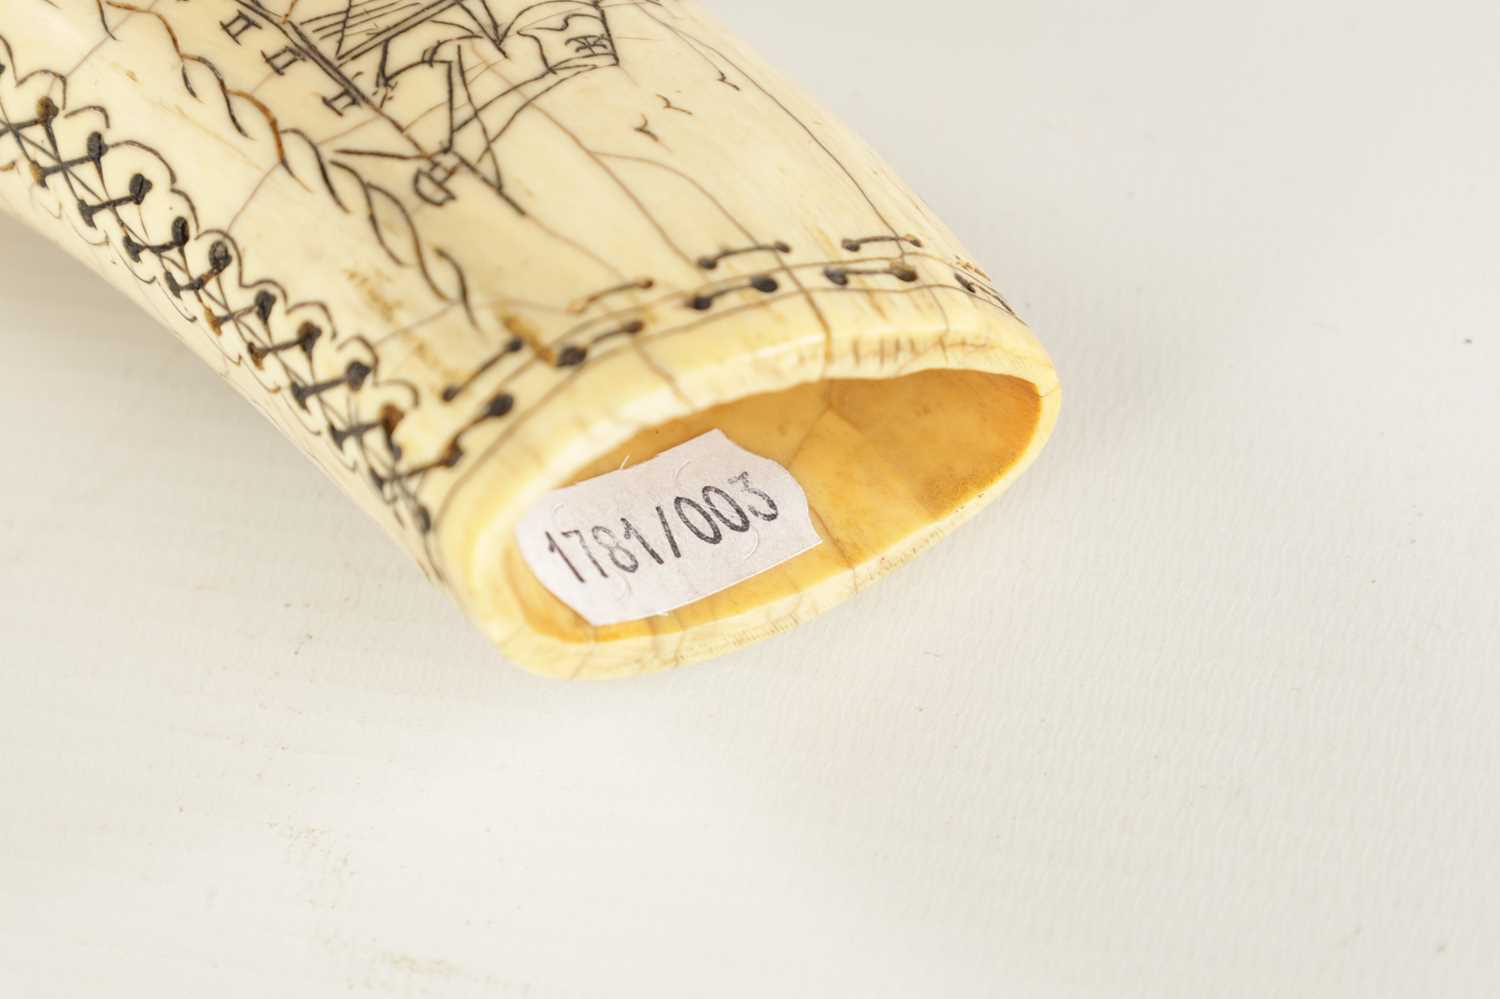 A 19TH CENTURY SAILS SCRIMSHAW WHALE TOOTH - Image 7 of 8